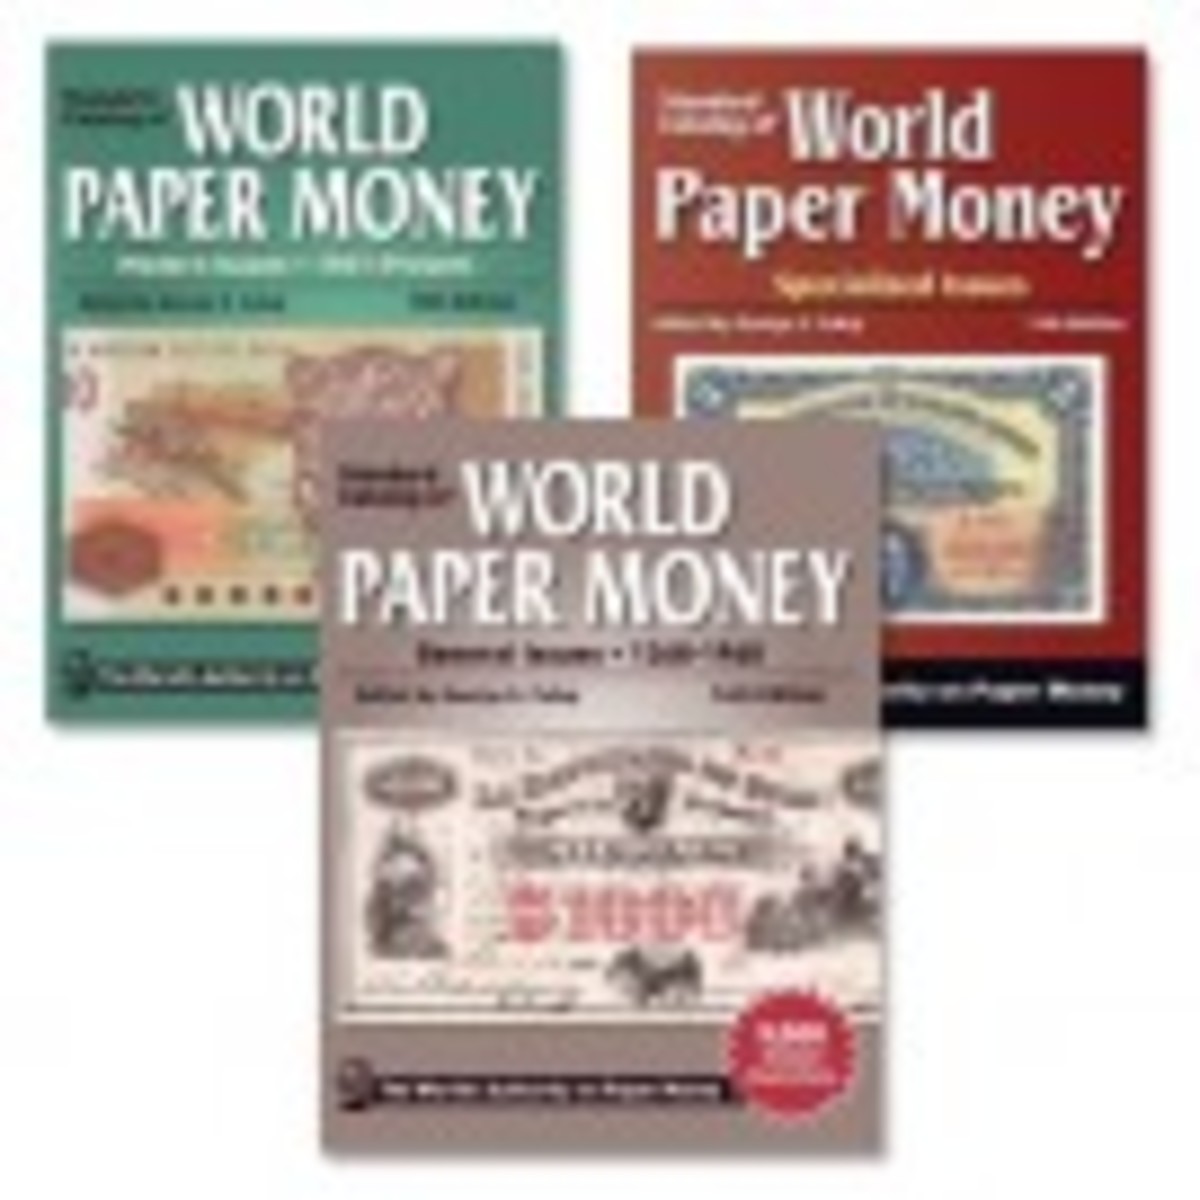 All three of the latest Standard Catalogs of World Paper Money in one package, for one low price.